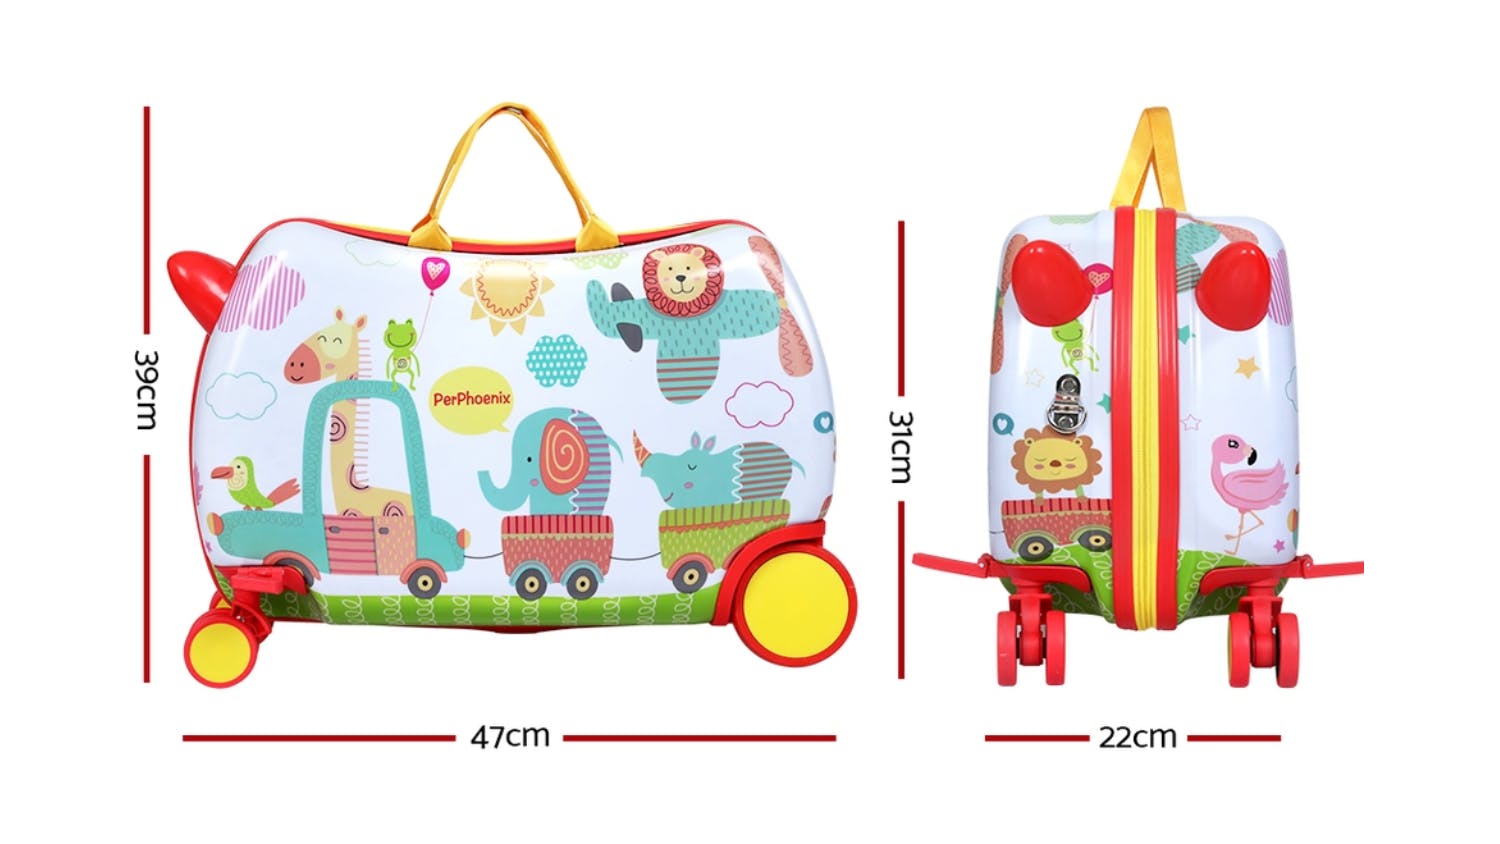 Wanderlite Kids' Ride-On Luggage with Wheels 43cm - Zoo Parade